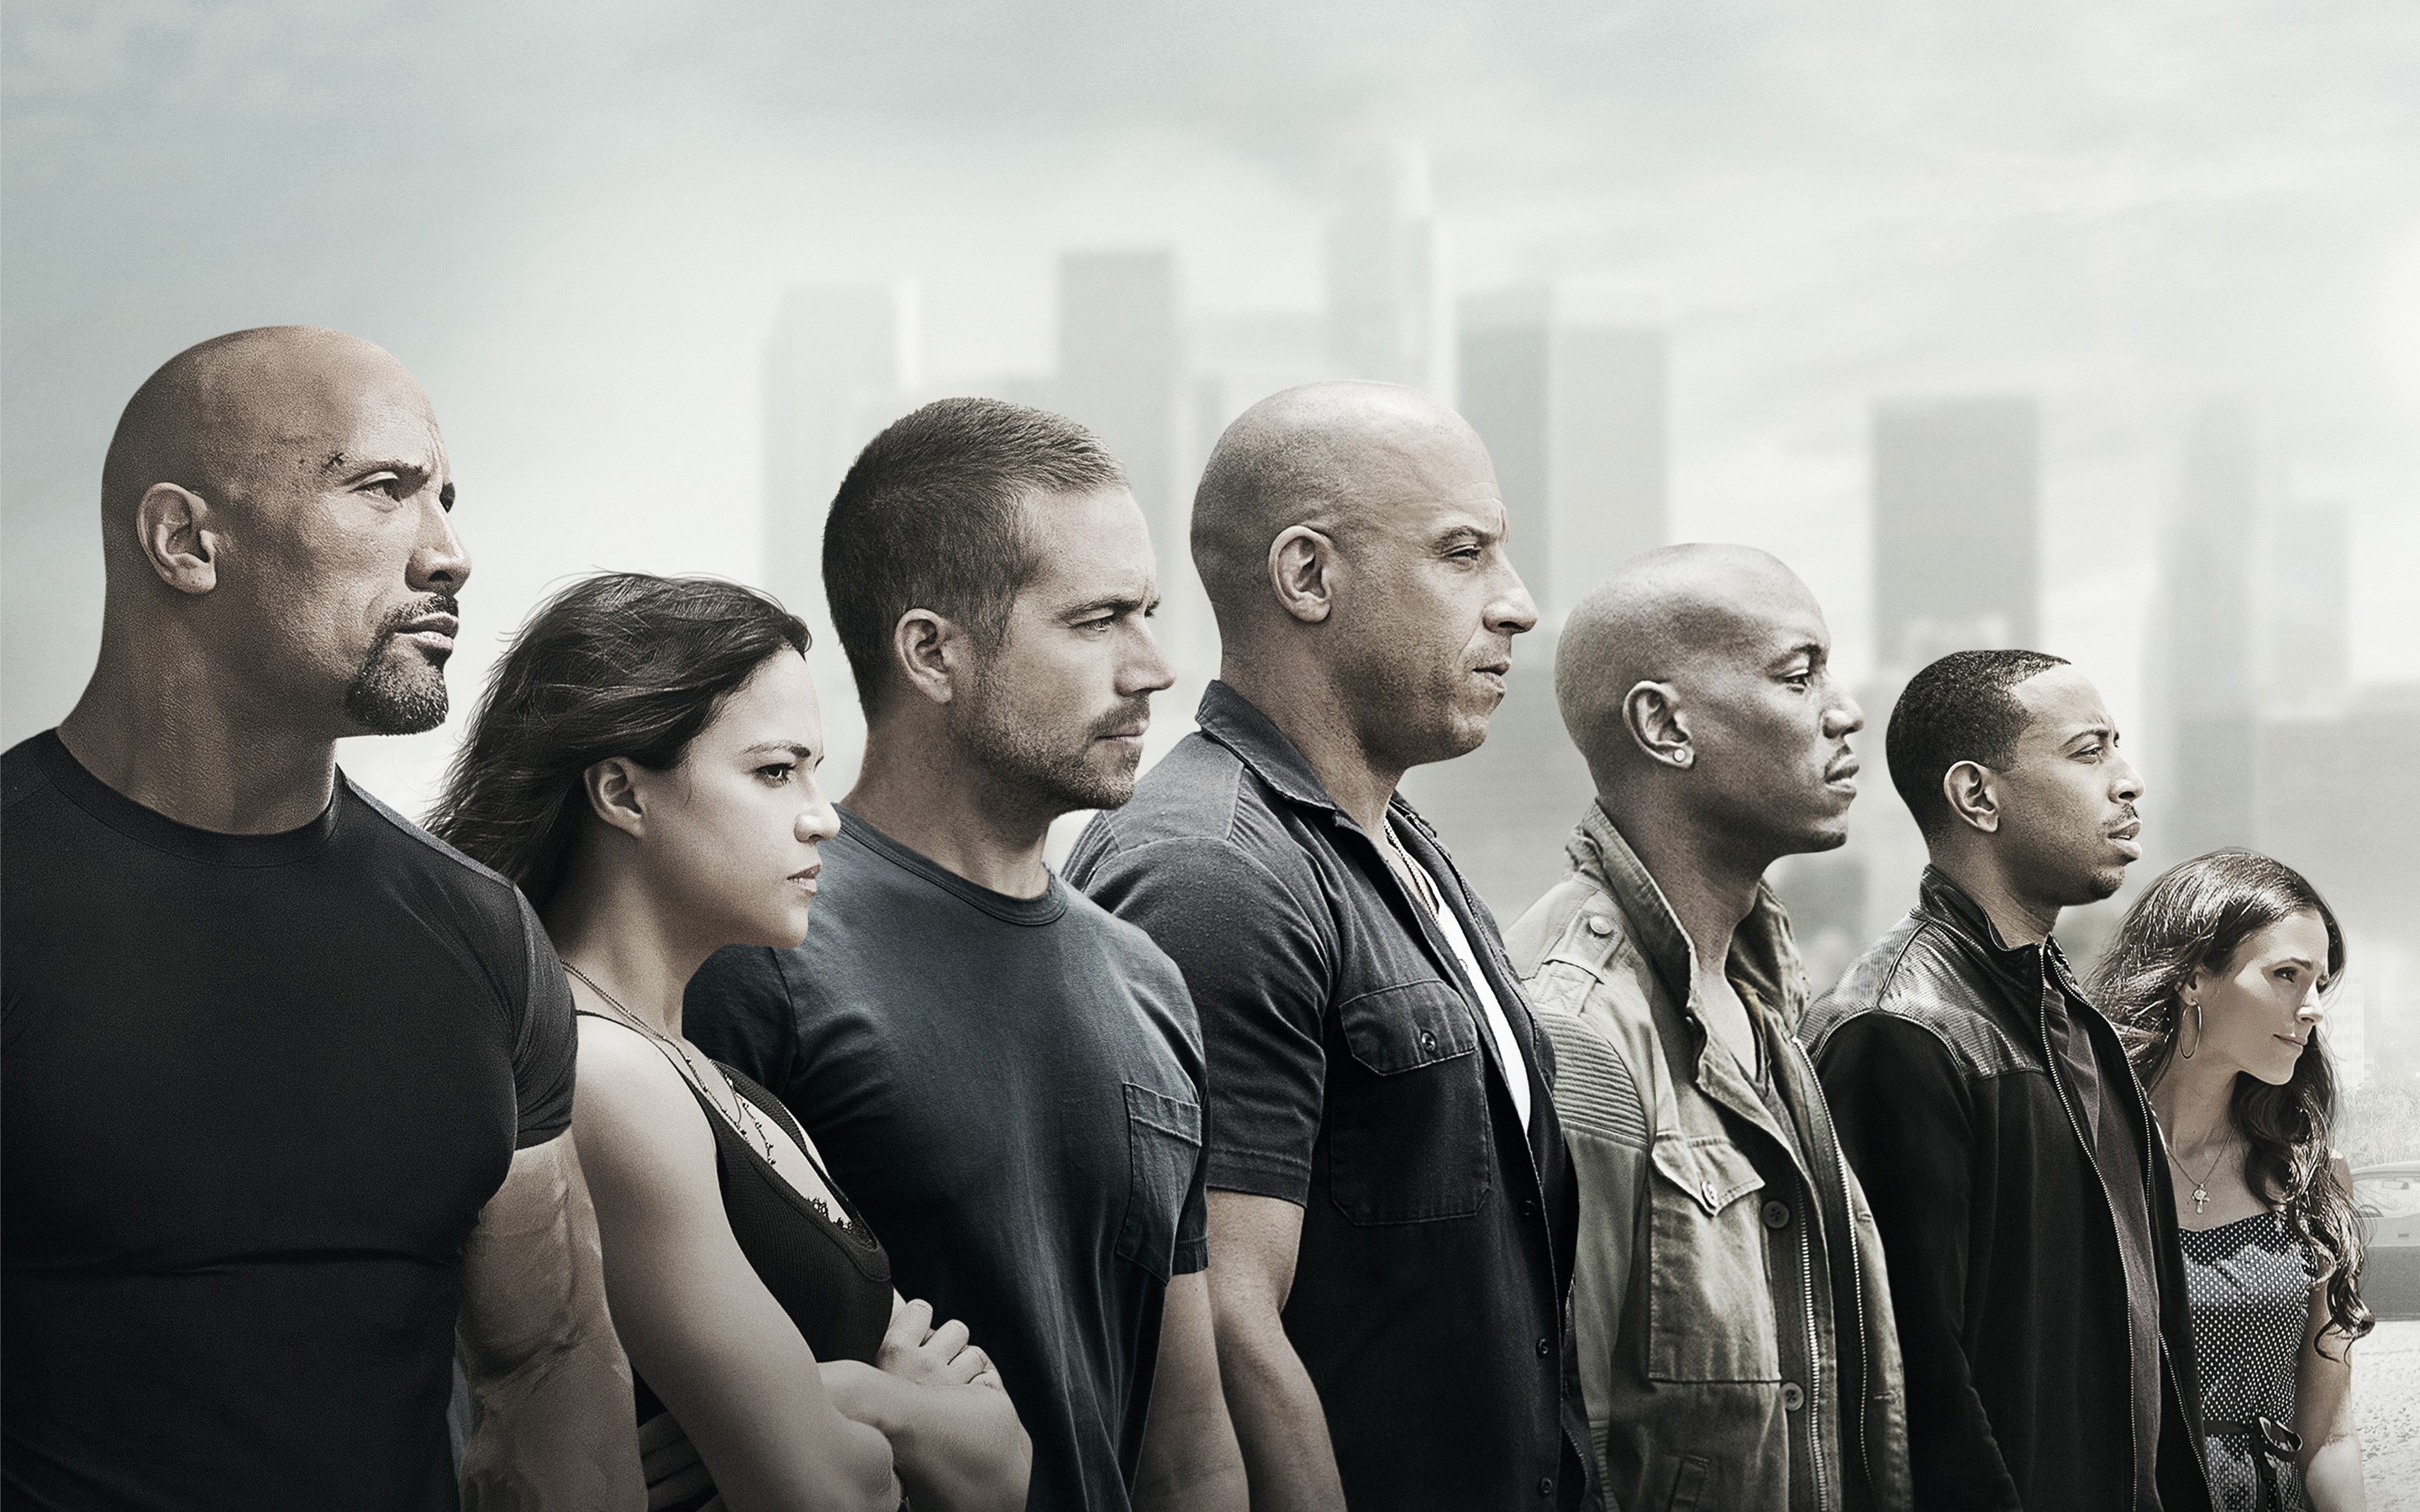 Original fast furious director rob cohen wants to direct final film